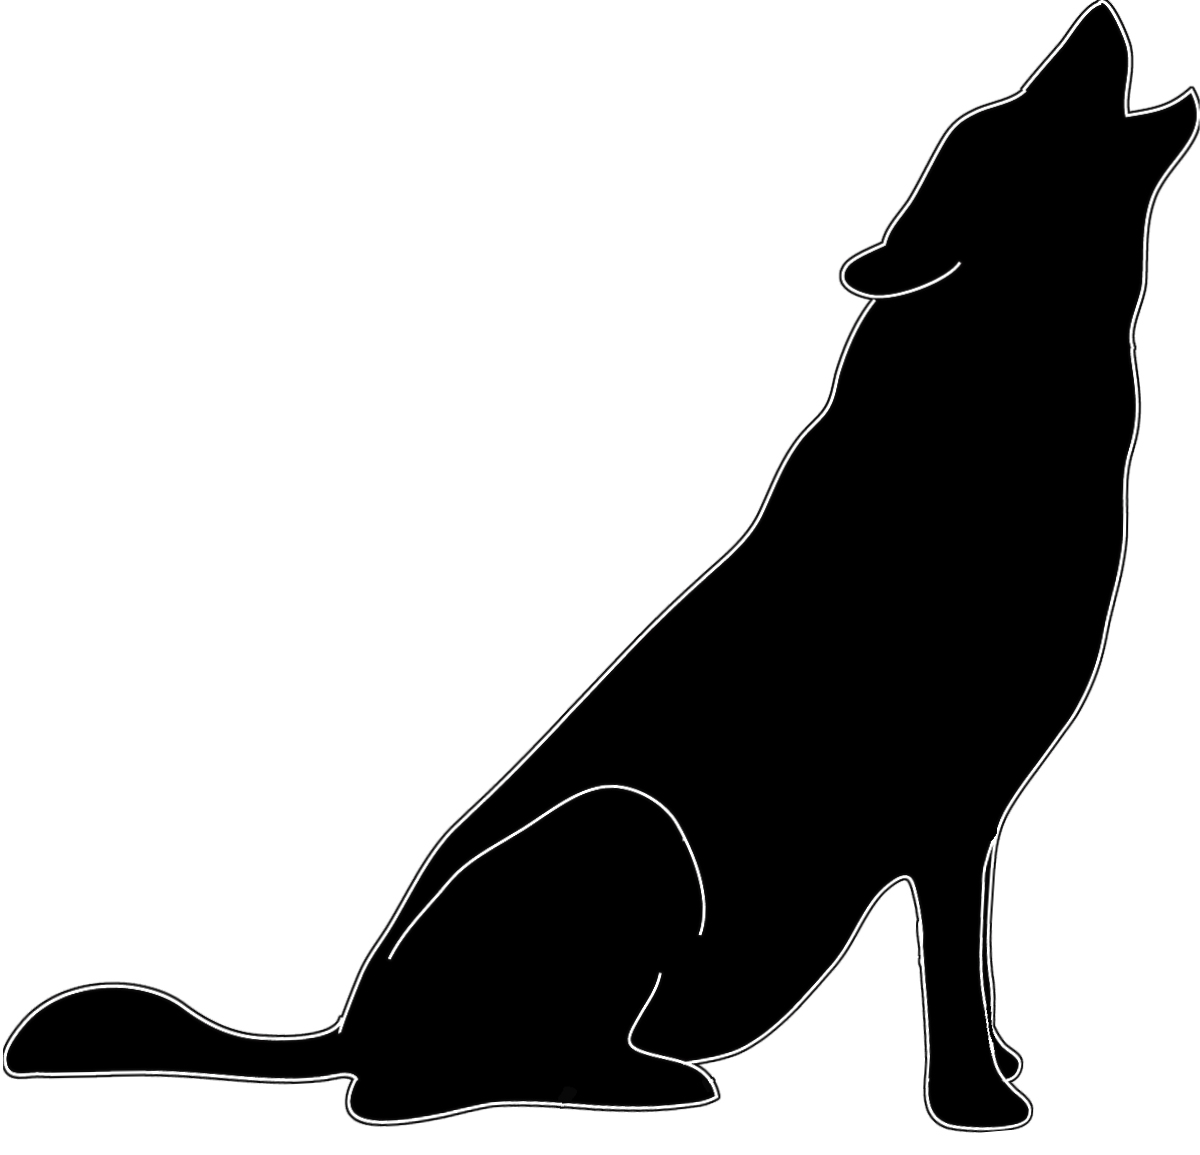 Clip art silhouette of wolf, 